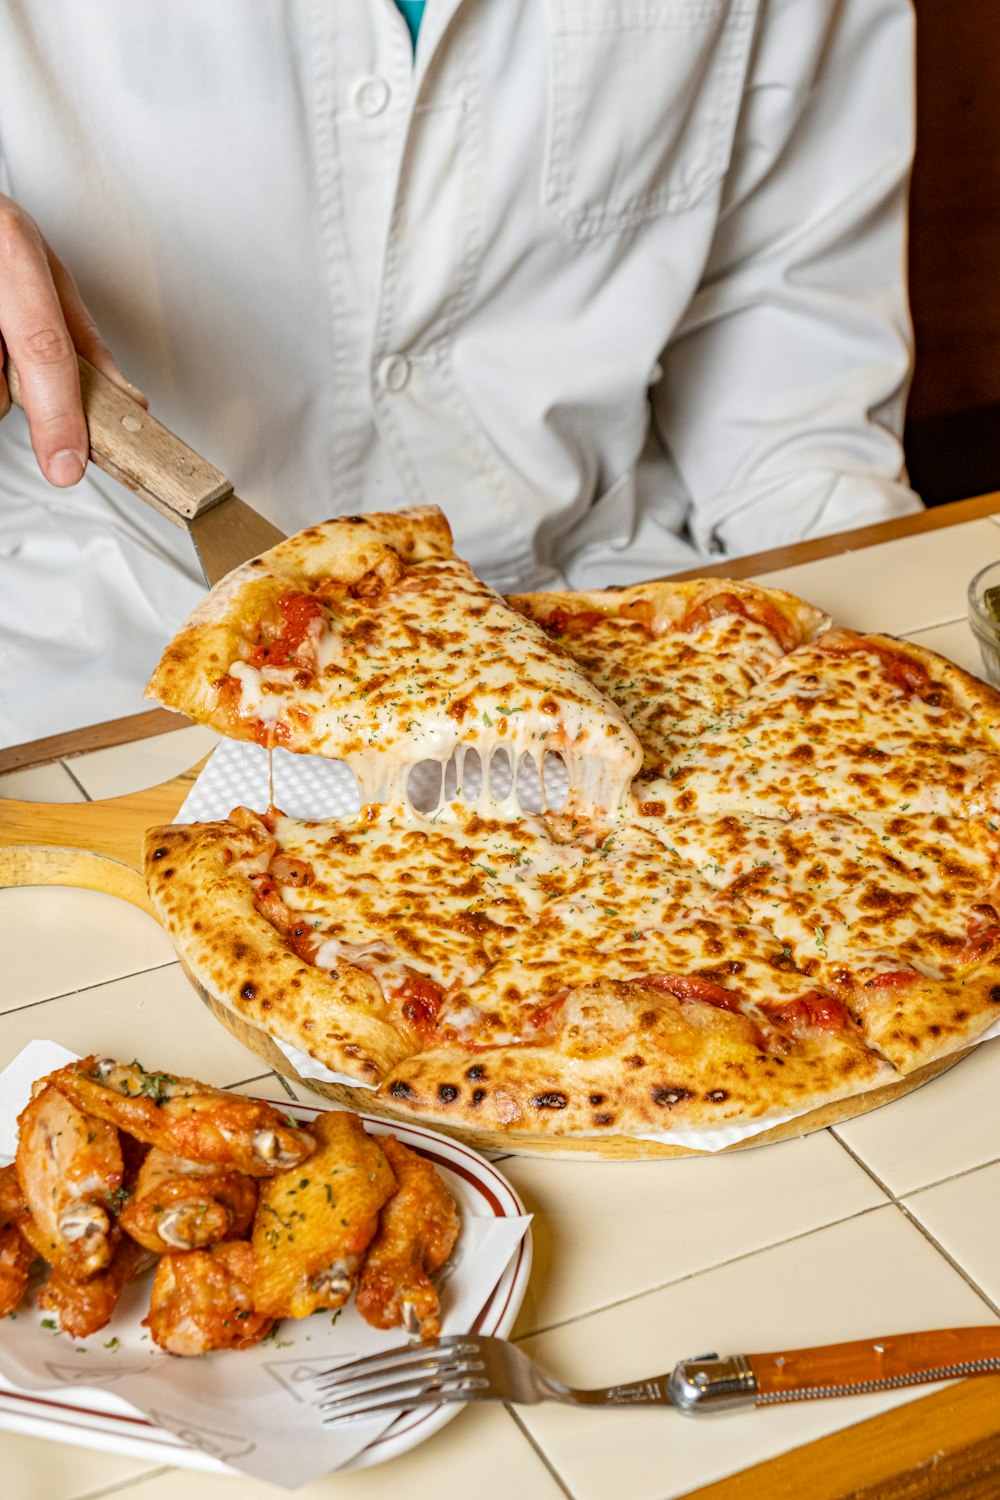 a person cutting a pizza with a knife and fork